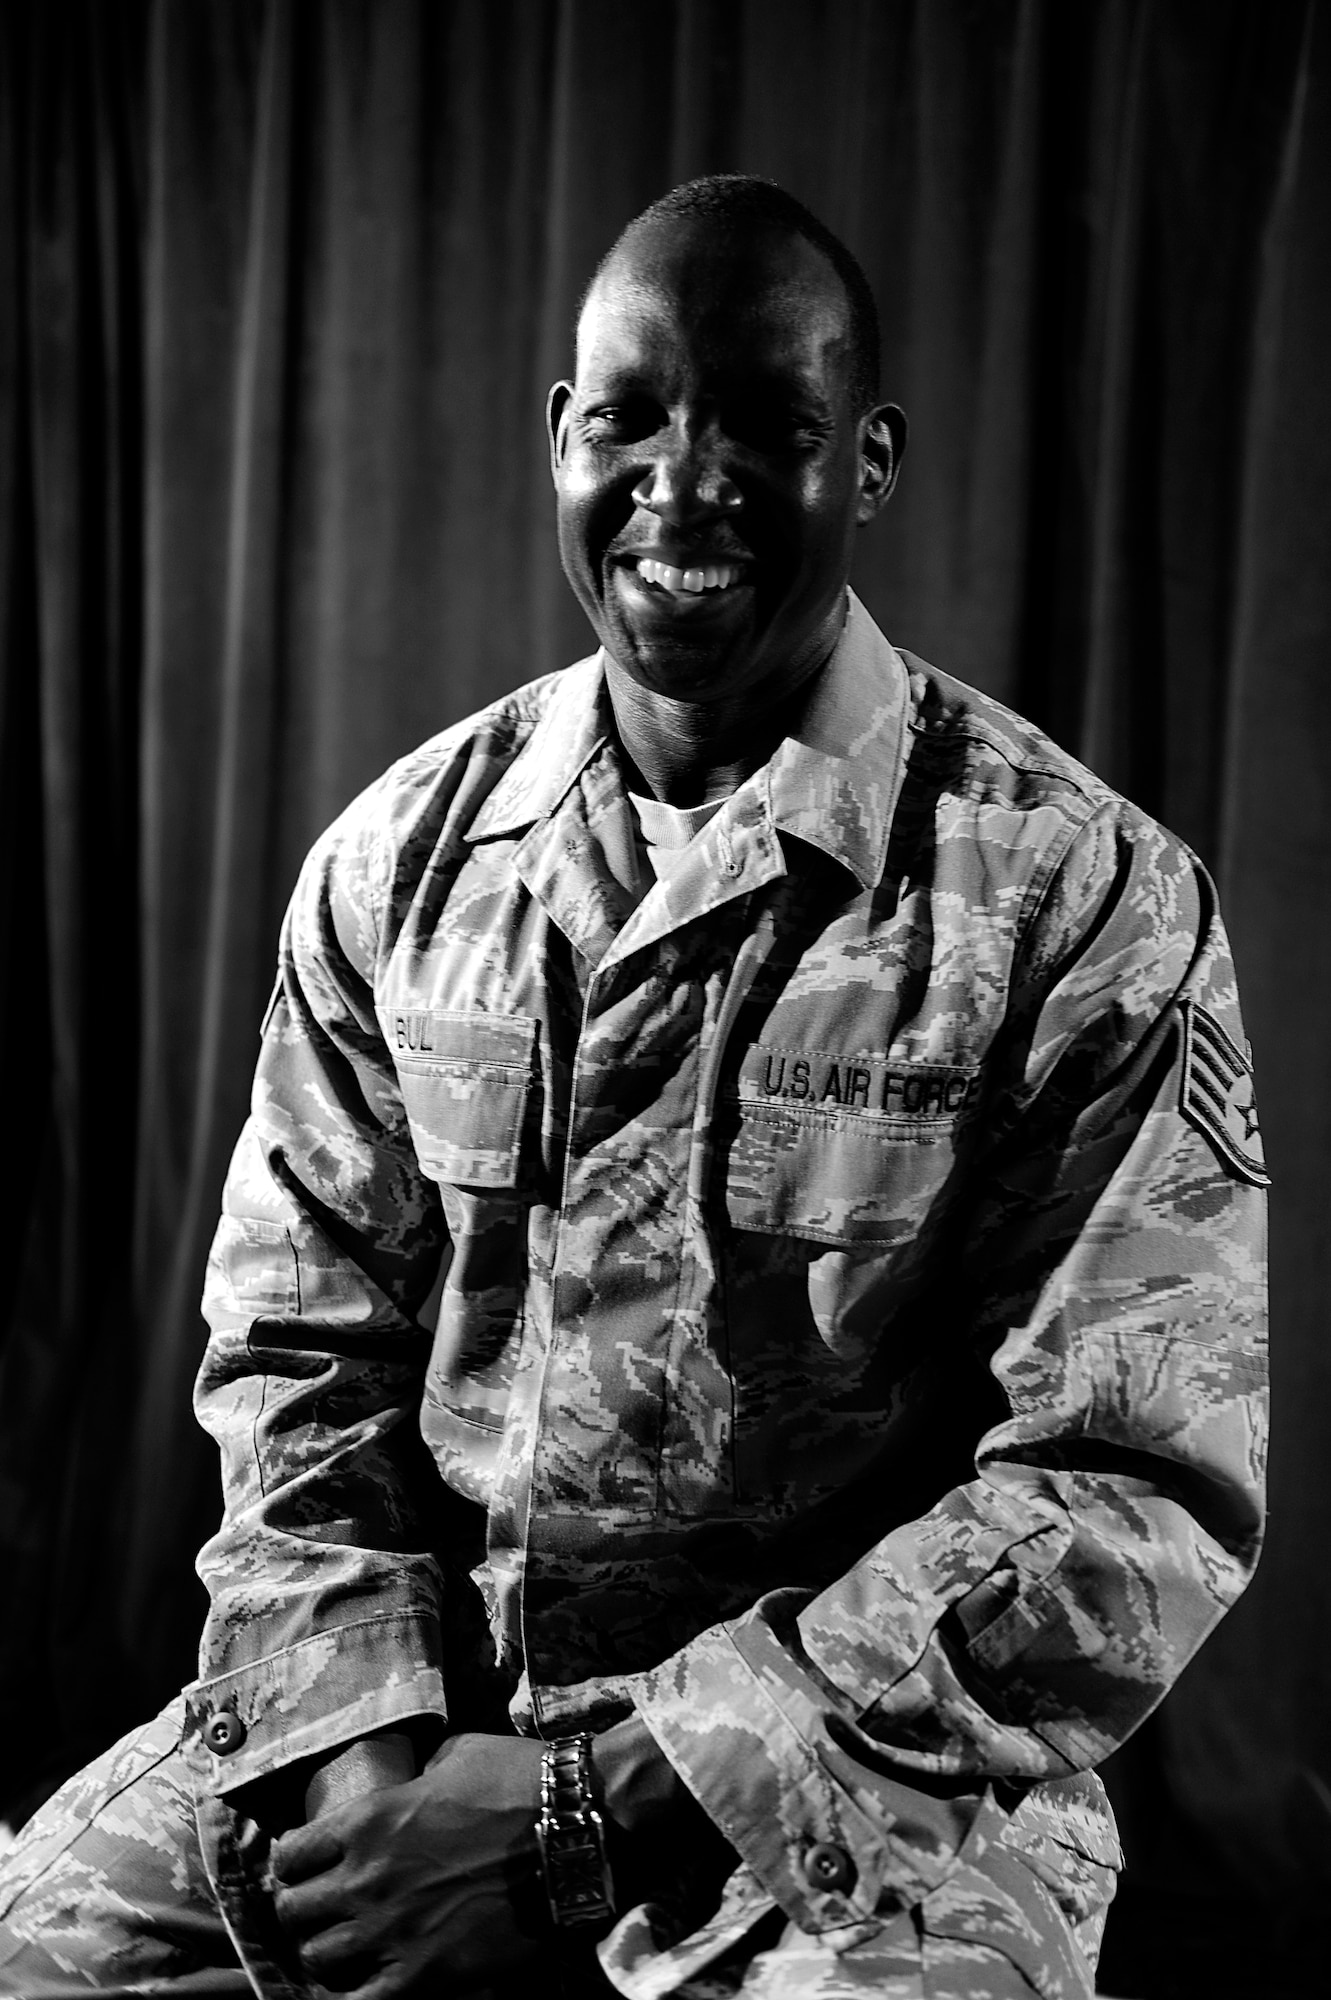 Staff Sgt. Madut Bul was labeled a 'Lost Boy of Sudan' by the United Nations as a teenager. A Sudan native, Bul trekked more than 1,000 miles on foot along with roughly 30,000 other children in the early 1990s to escape the destruction and mayhem of civil war. Despite the horrors he witnessed, Bul joined the U.S. Air Force approximately eight years ago, and now shares his story to be an inspiration and testament to resilience. Bul is a 33rd Helicopter Maintenance Unit supply specialist. (U.S. Air Force photo/Senior Airman Maeson L. Elleman)